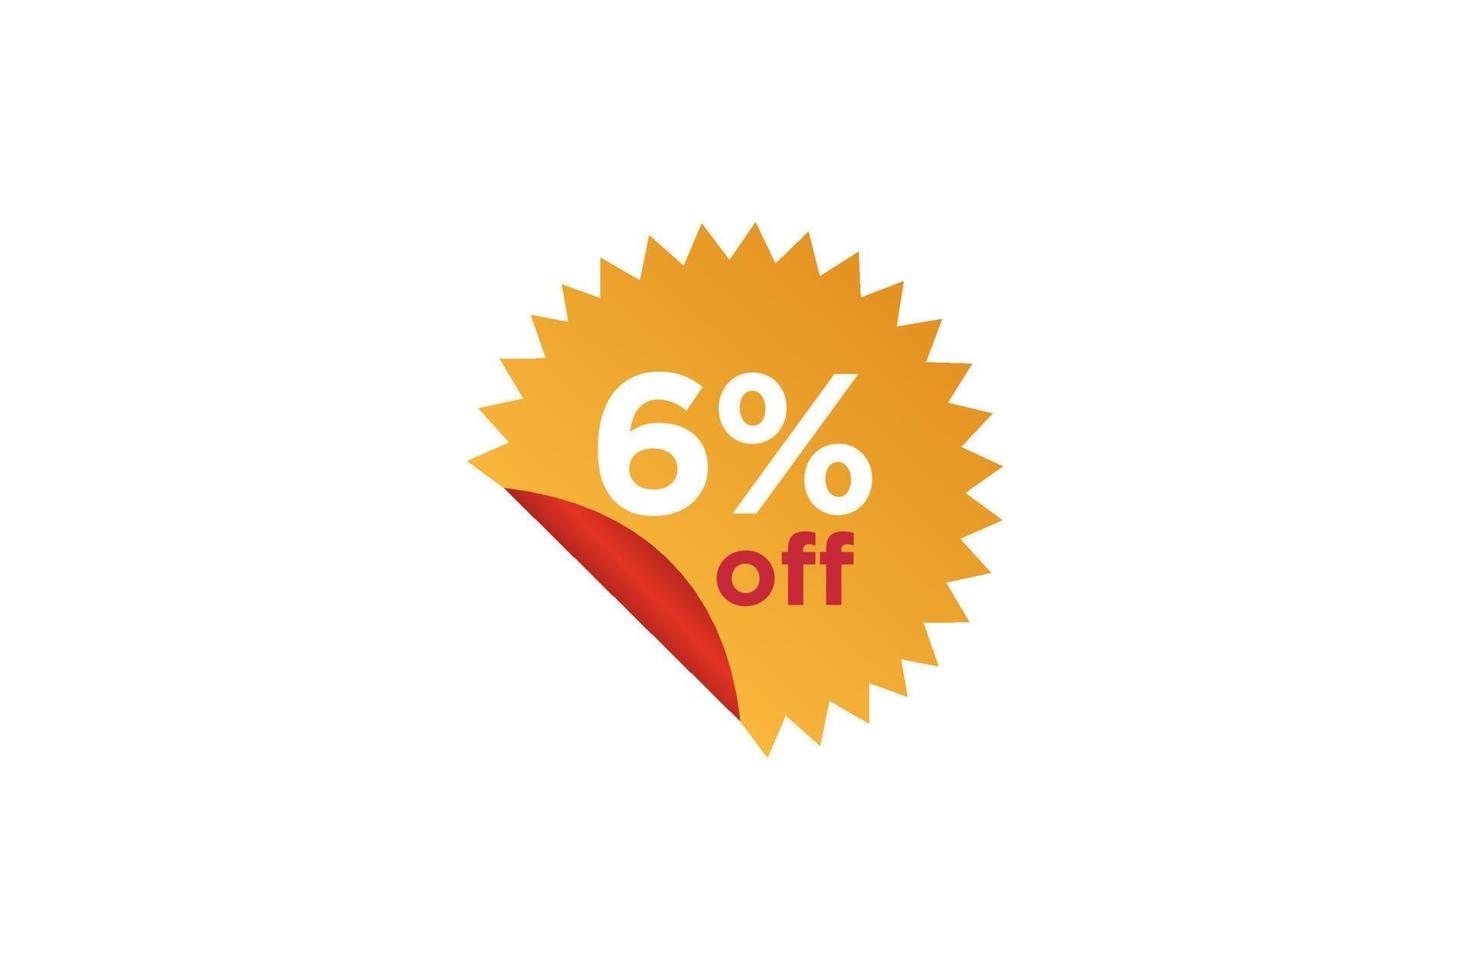 6 discount, Sales Vector badges for Labels, , Stickers, Banners, Tags, Web Stickers, New offer. Discount origami sign banner.